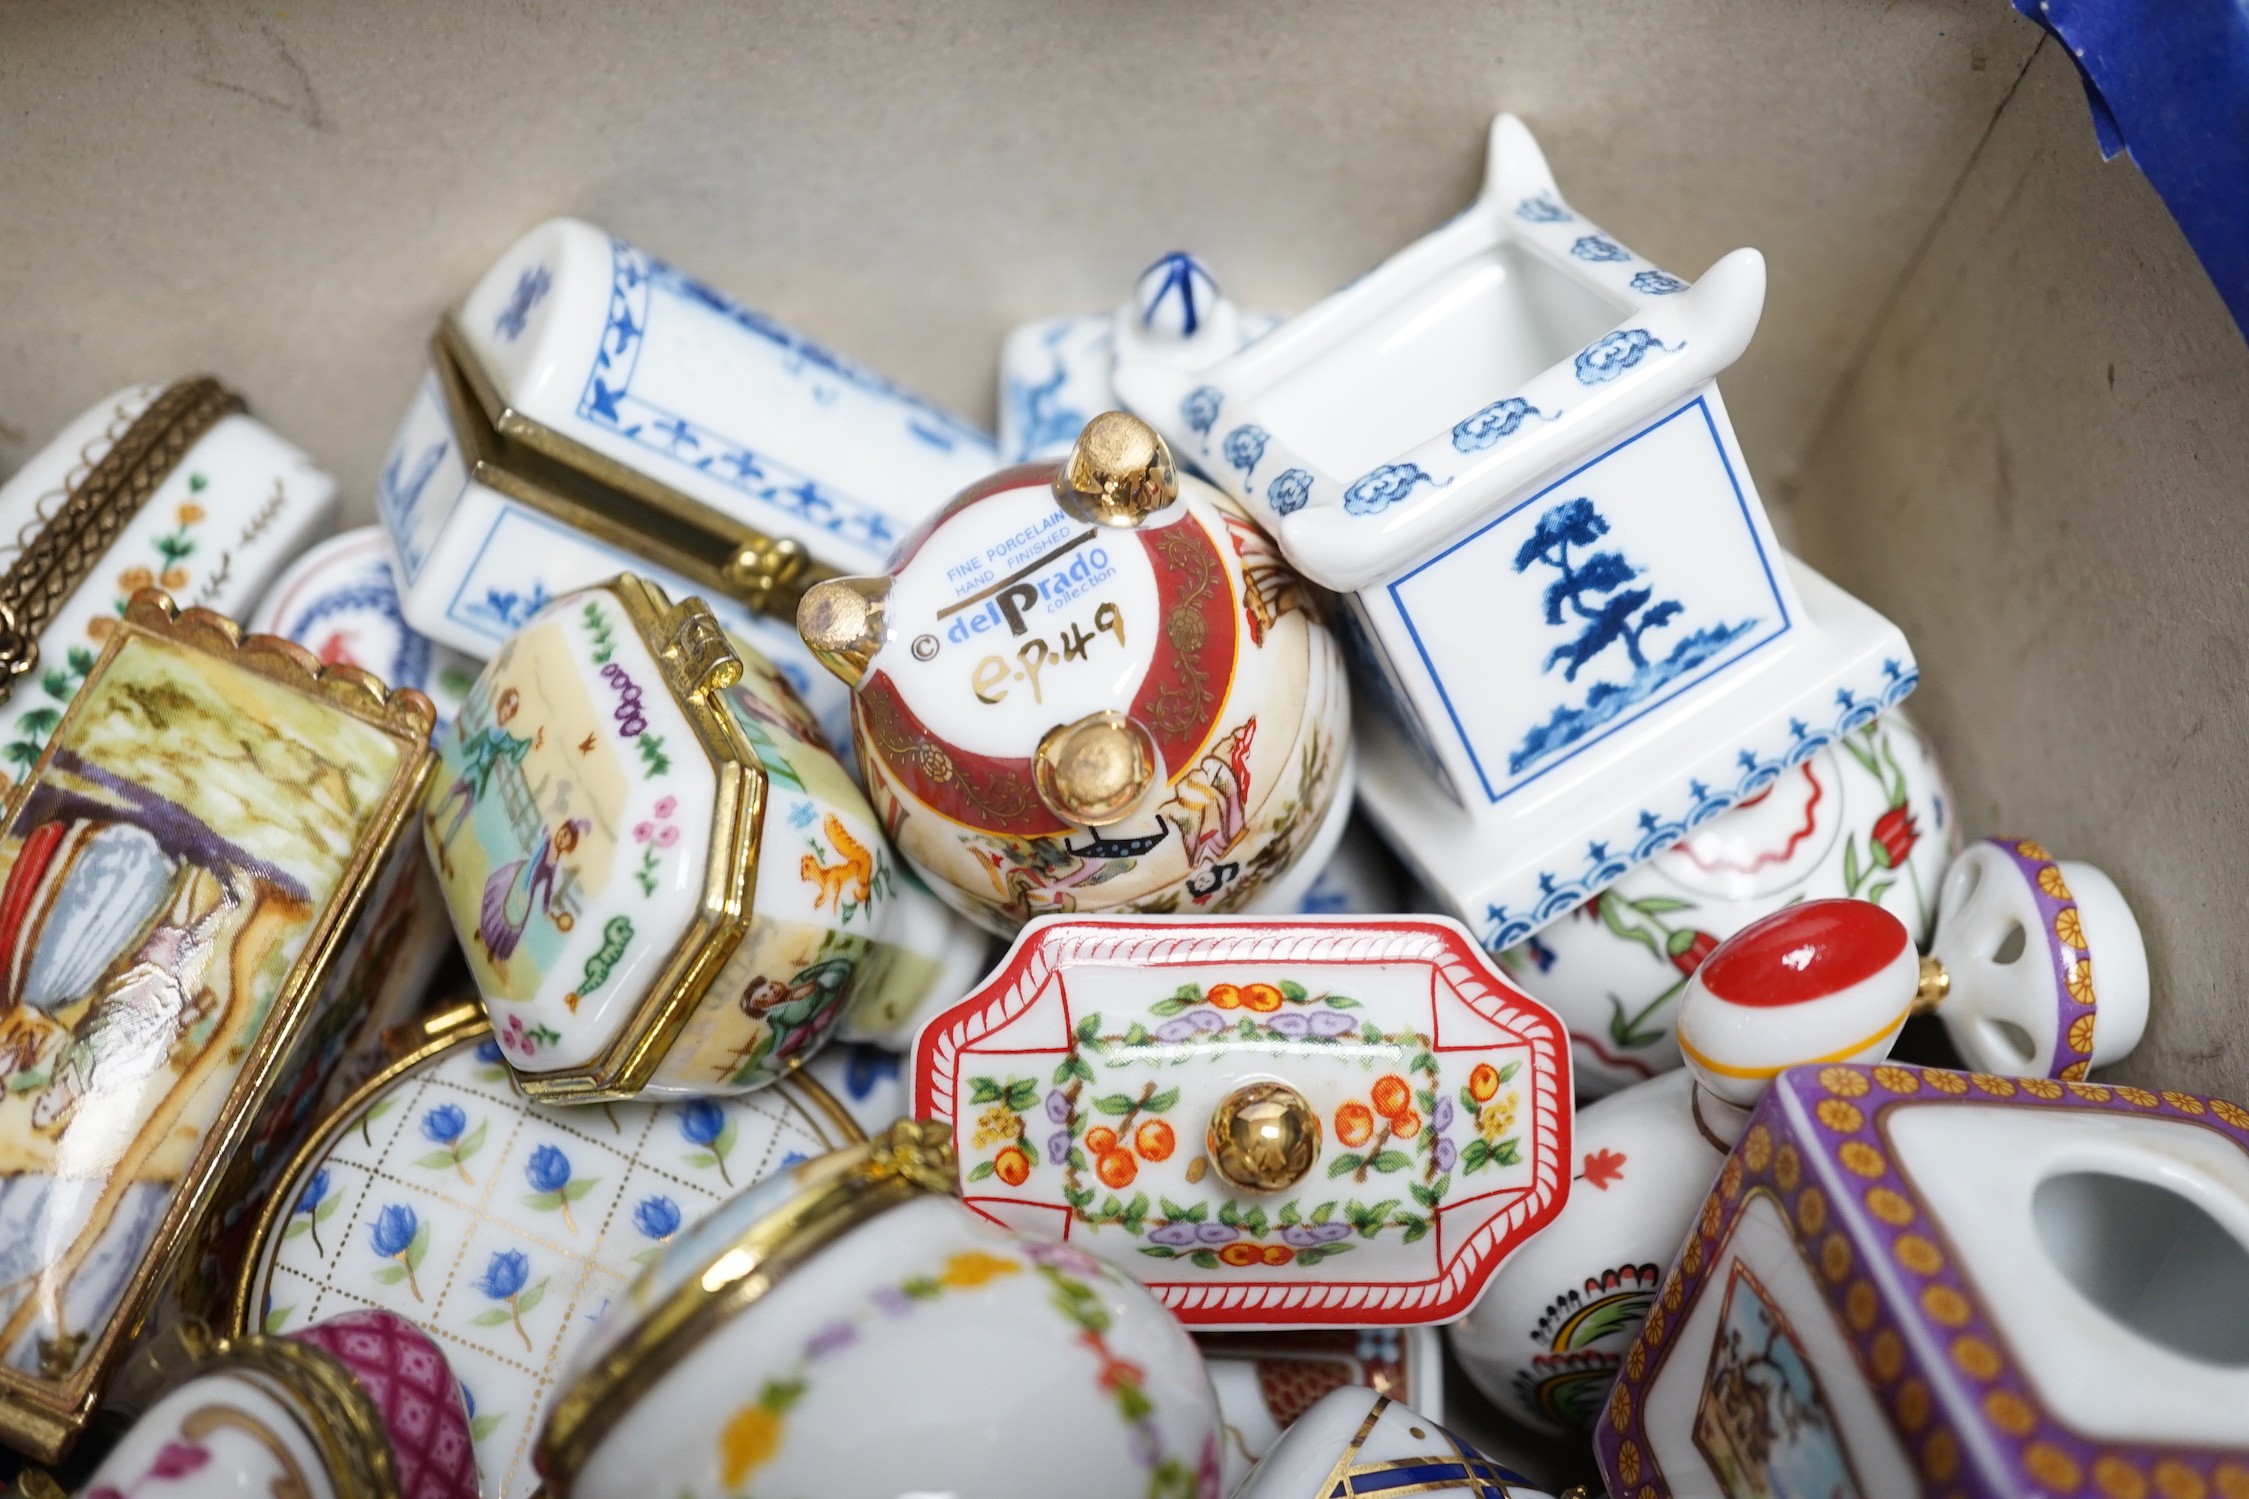 A quantity of approximately sixty Del Prado oriental and classic collection porcelain boxes, together with accompanying book and ephemera